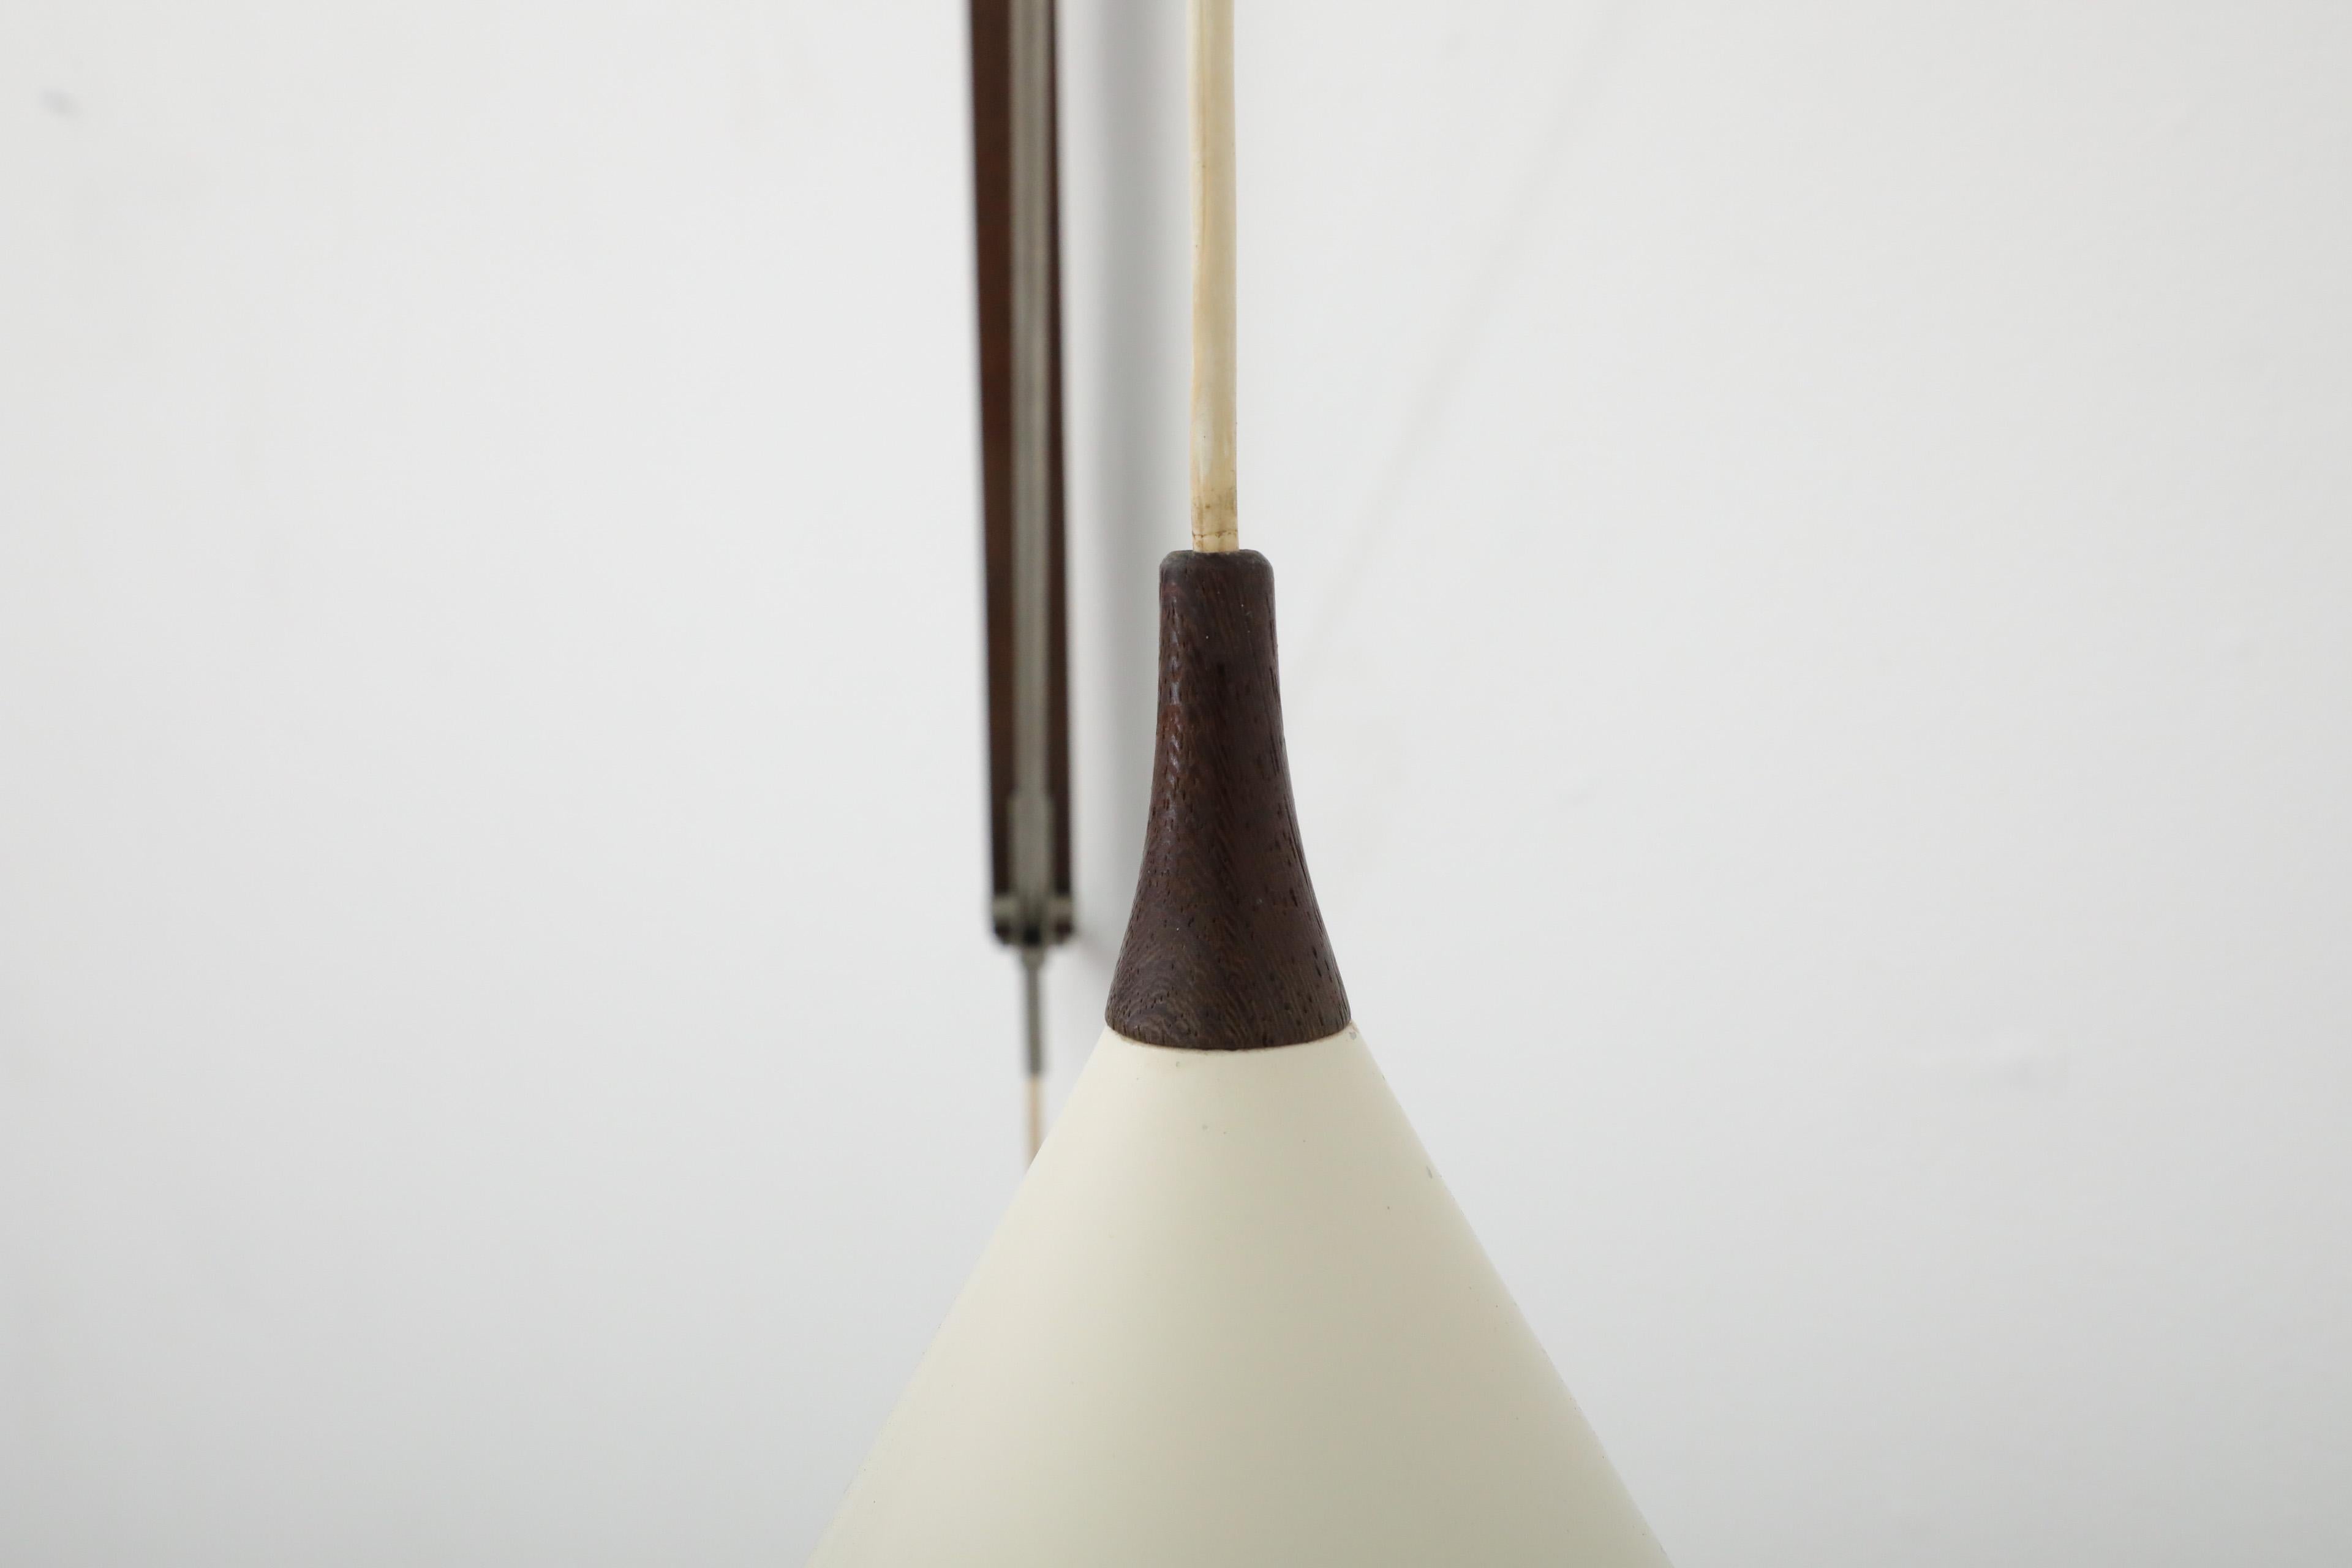 Rare Willem Hagoort Wall Sconce w/ White Enameled Metal Cone Shade & Teak Mount For Sale 8